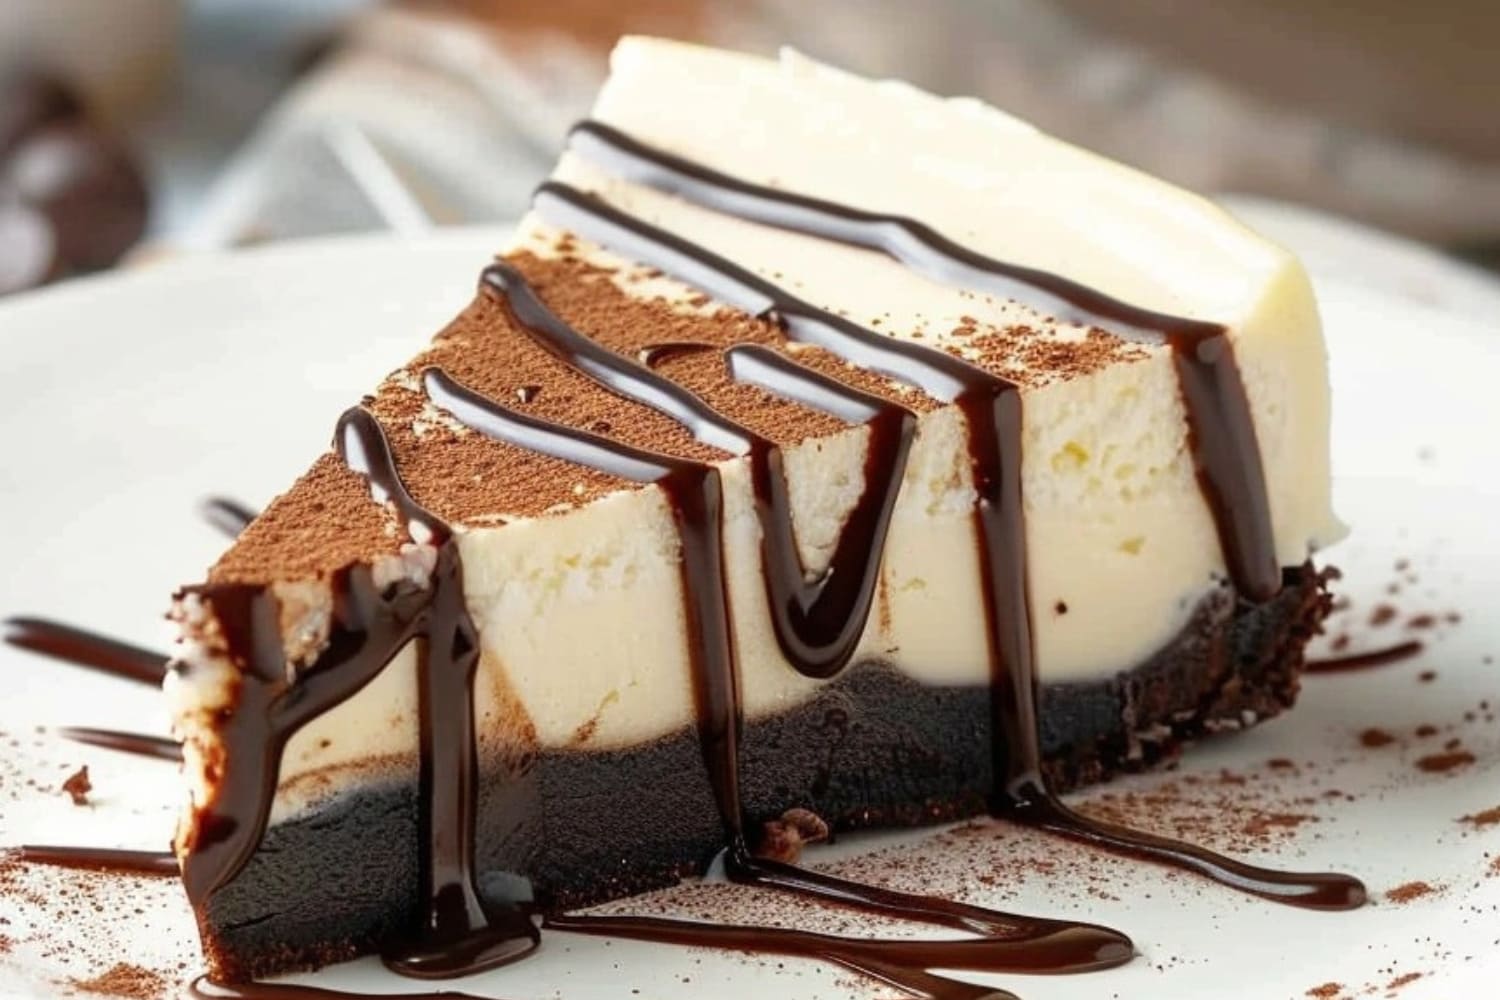 Slice of cheesecake with brownie bottom drizzled with chocolate syrup.